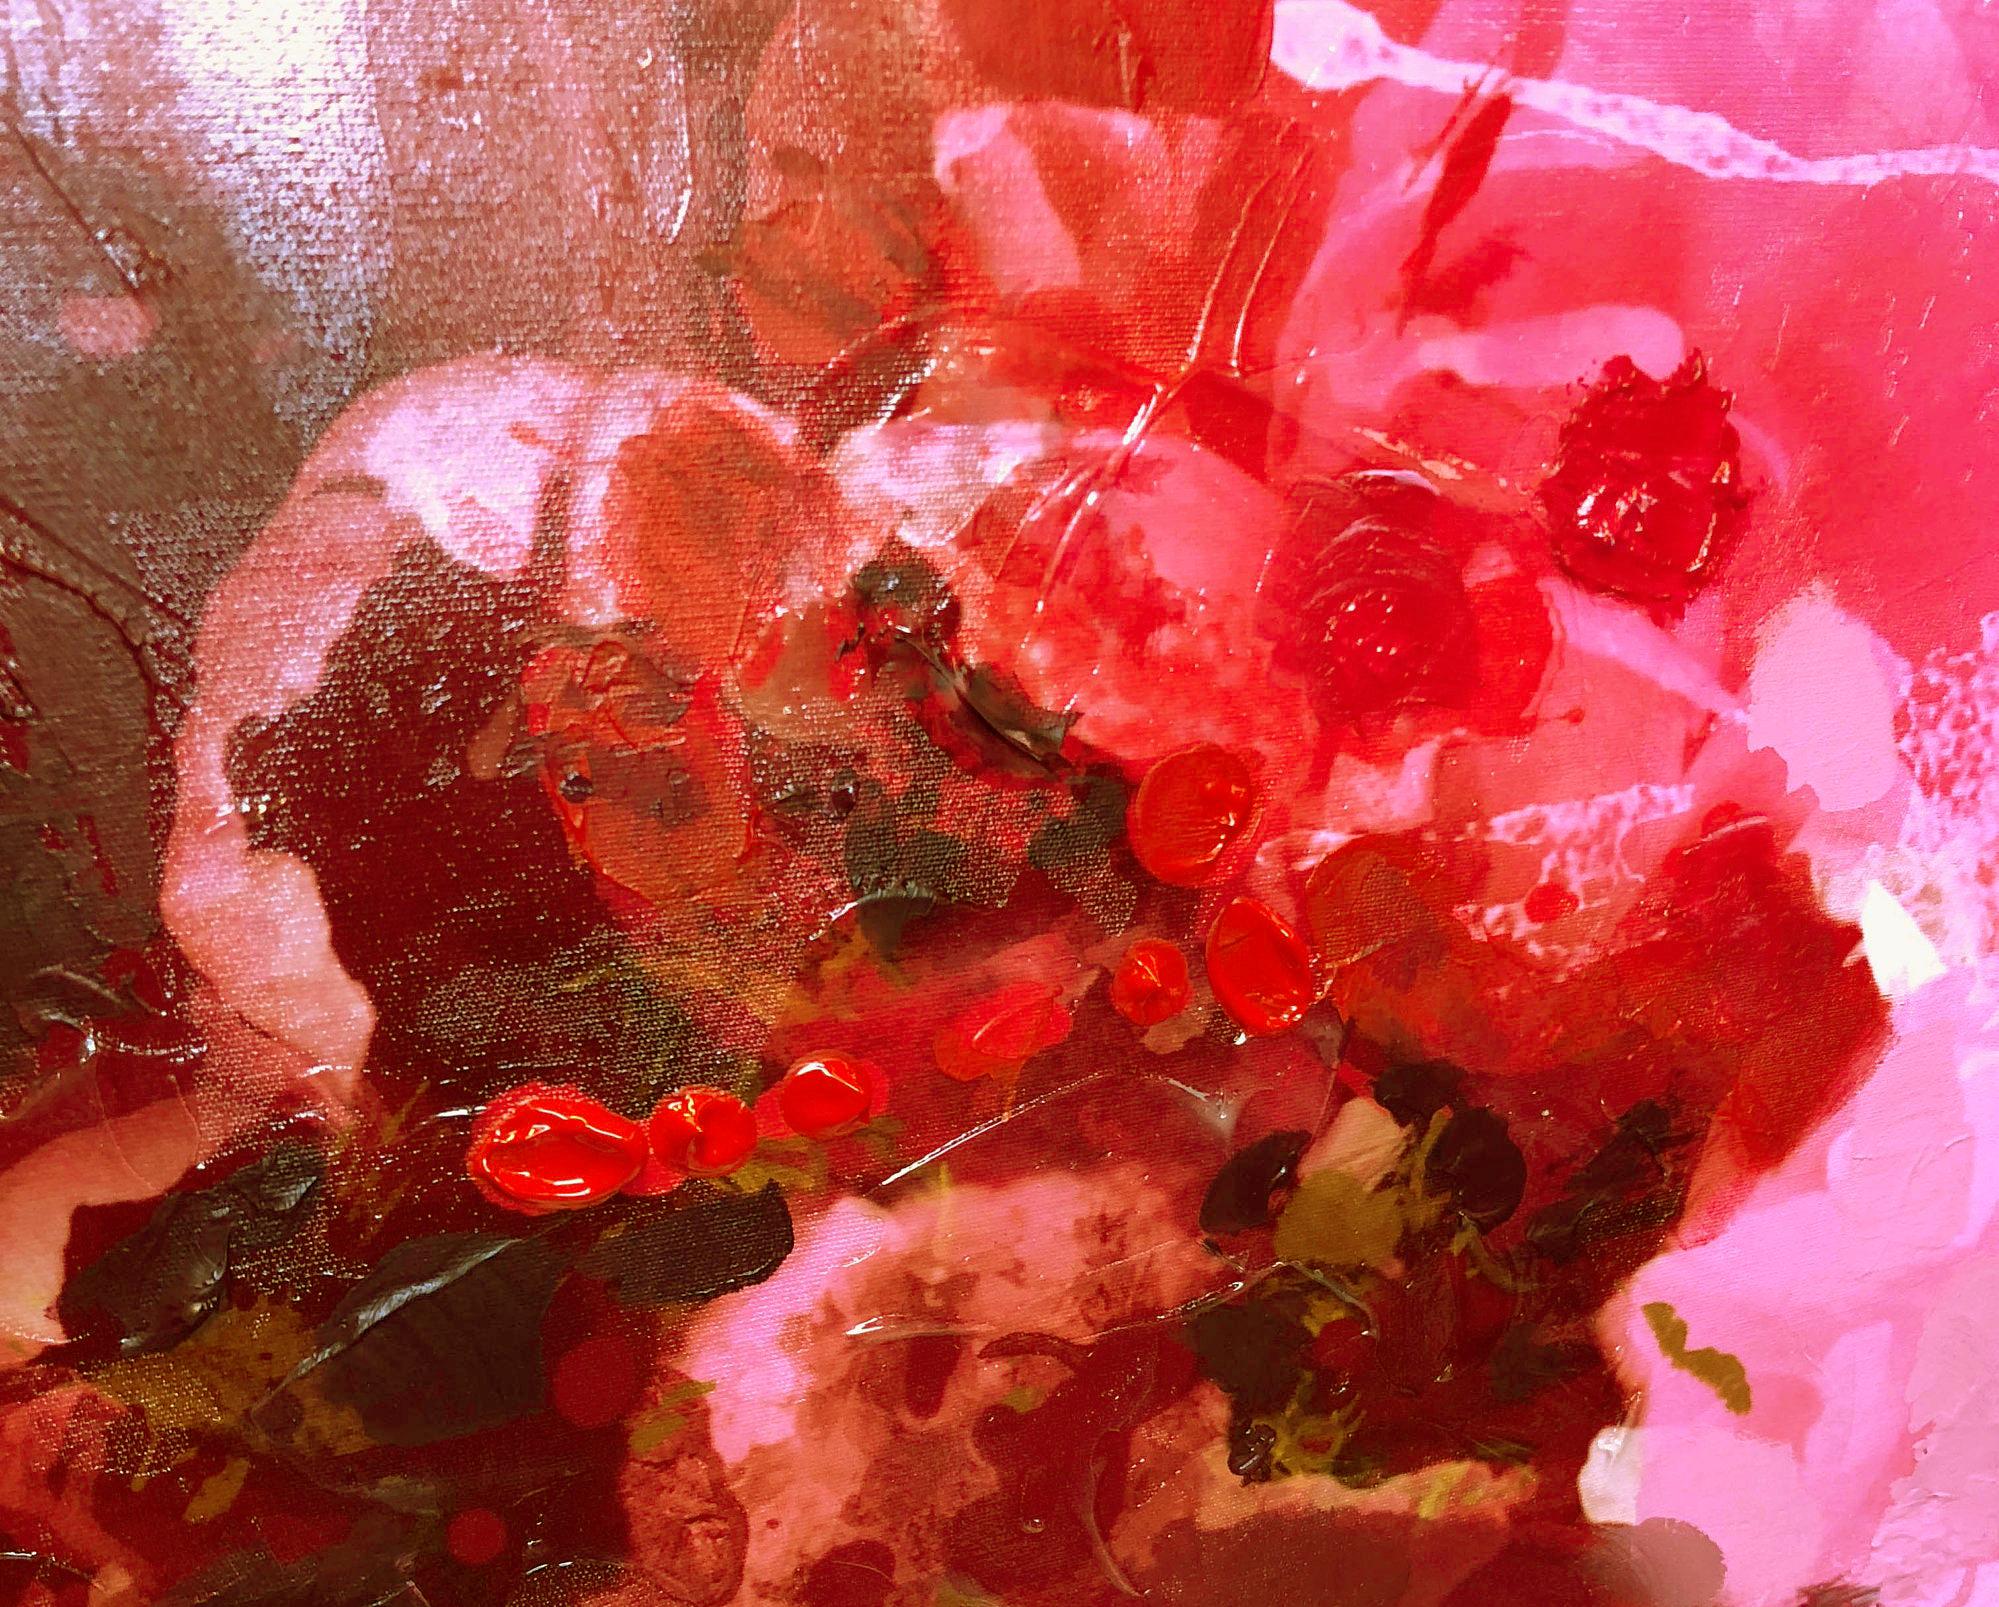 Red Flowers Painting Hand Embellished Giclee on Canvas

Collector's Edition Embellished Art Canvas Giclee With Brushstrokes and rich texture.

State-of-the-art HAND EMBELLISHED ∽ MUSEUM QUALITY ∽ DISPLAY READY Giclee Reproduction
Each limited